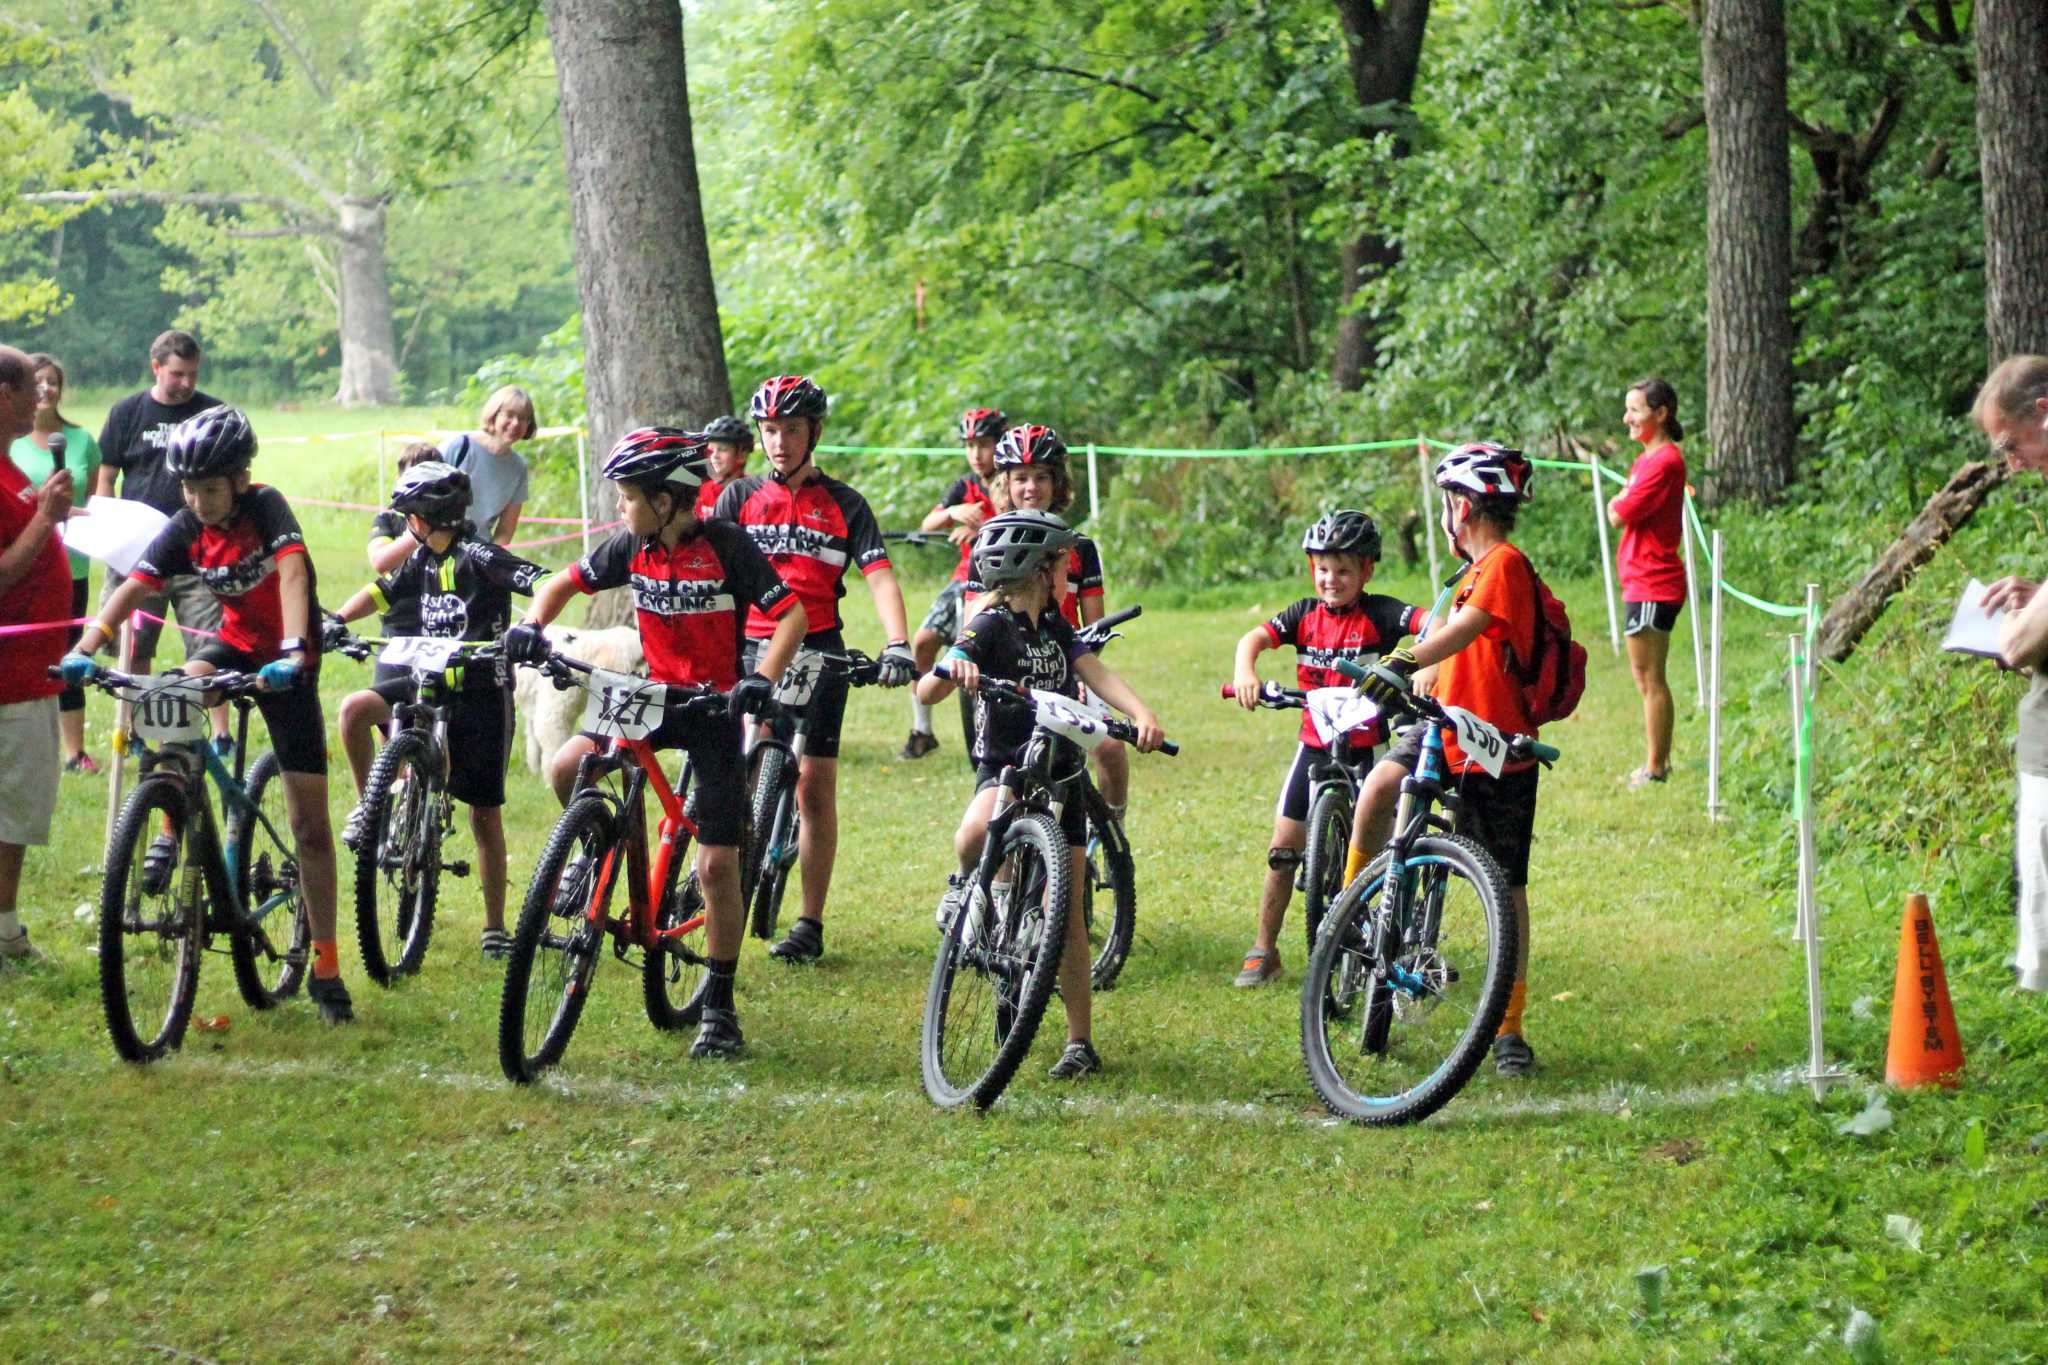 Fishburn youth mountain bikers prepare for another race